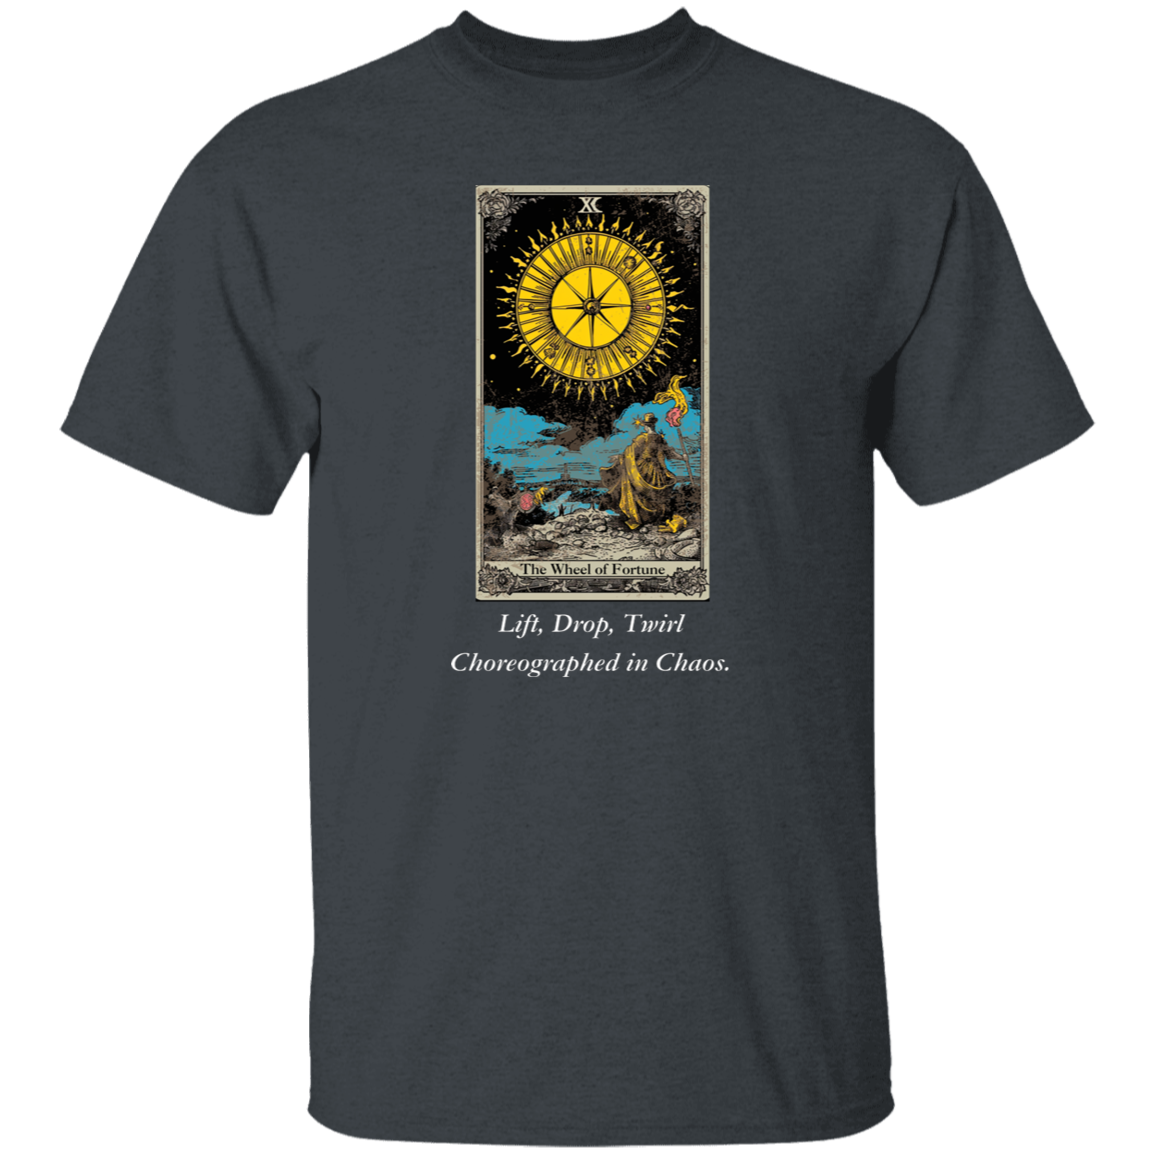 Funny, the wheel of fortune men's gray tarot card T shirt from BLK Moon Shop